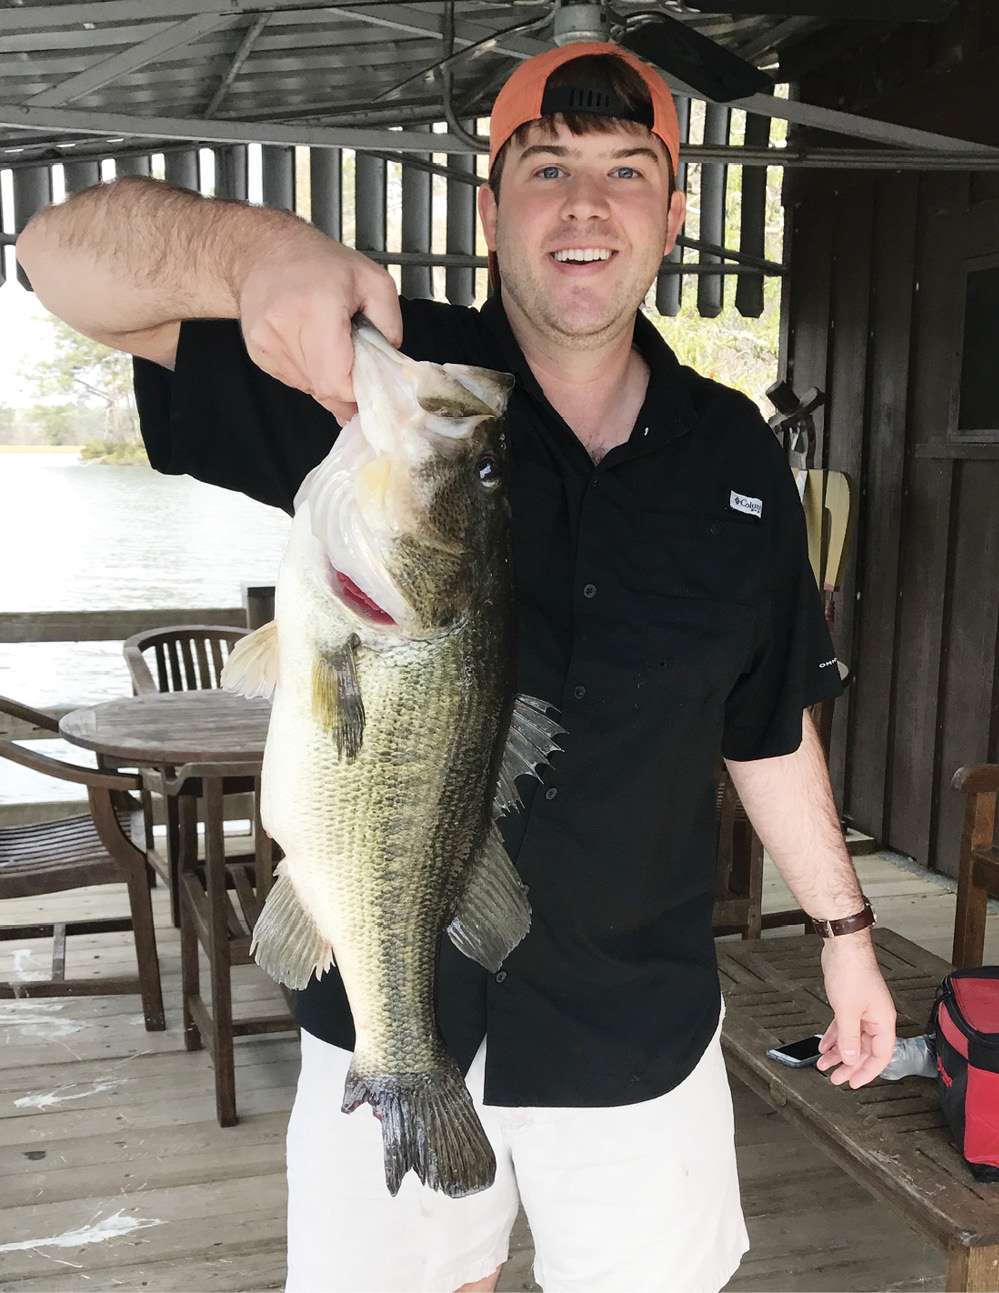 <b>Camp Jennings</b><br>
Alabama<br>
11-3 Private lake, Georgia<br>
3/8-ounce War Eagle Spinnberbait (white/chartreuse) <br>
Water clarity: clear<br>
Depth: 3 feet<br>
Weather: clear, windy
